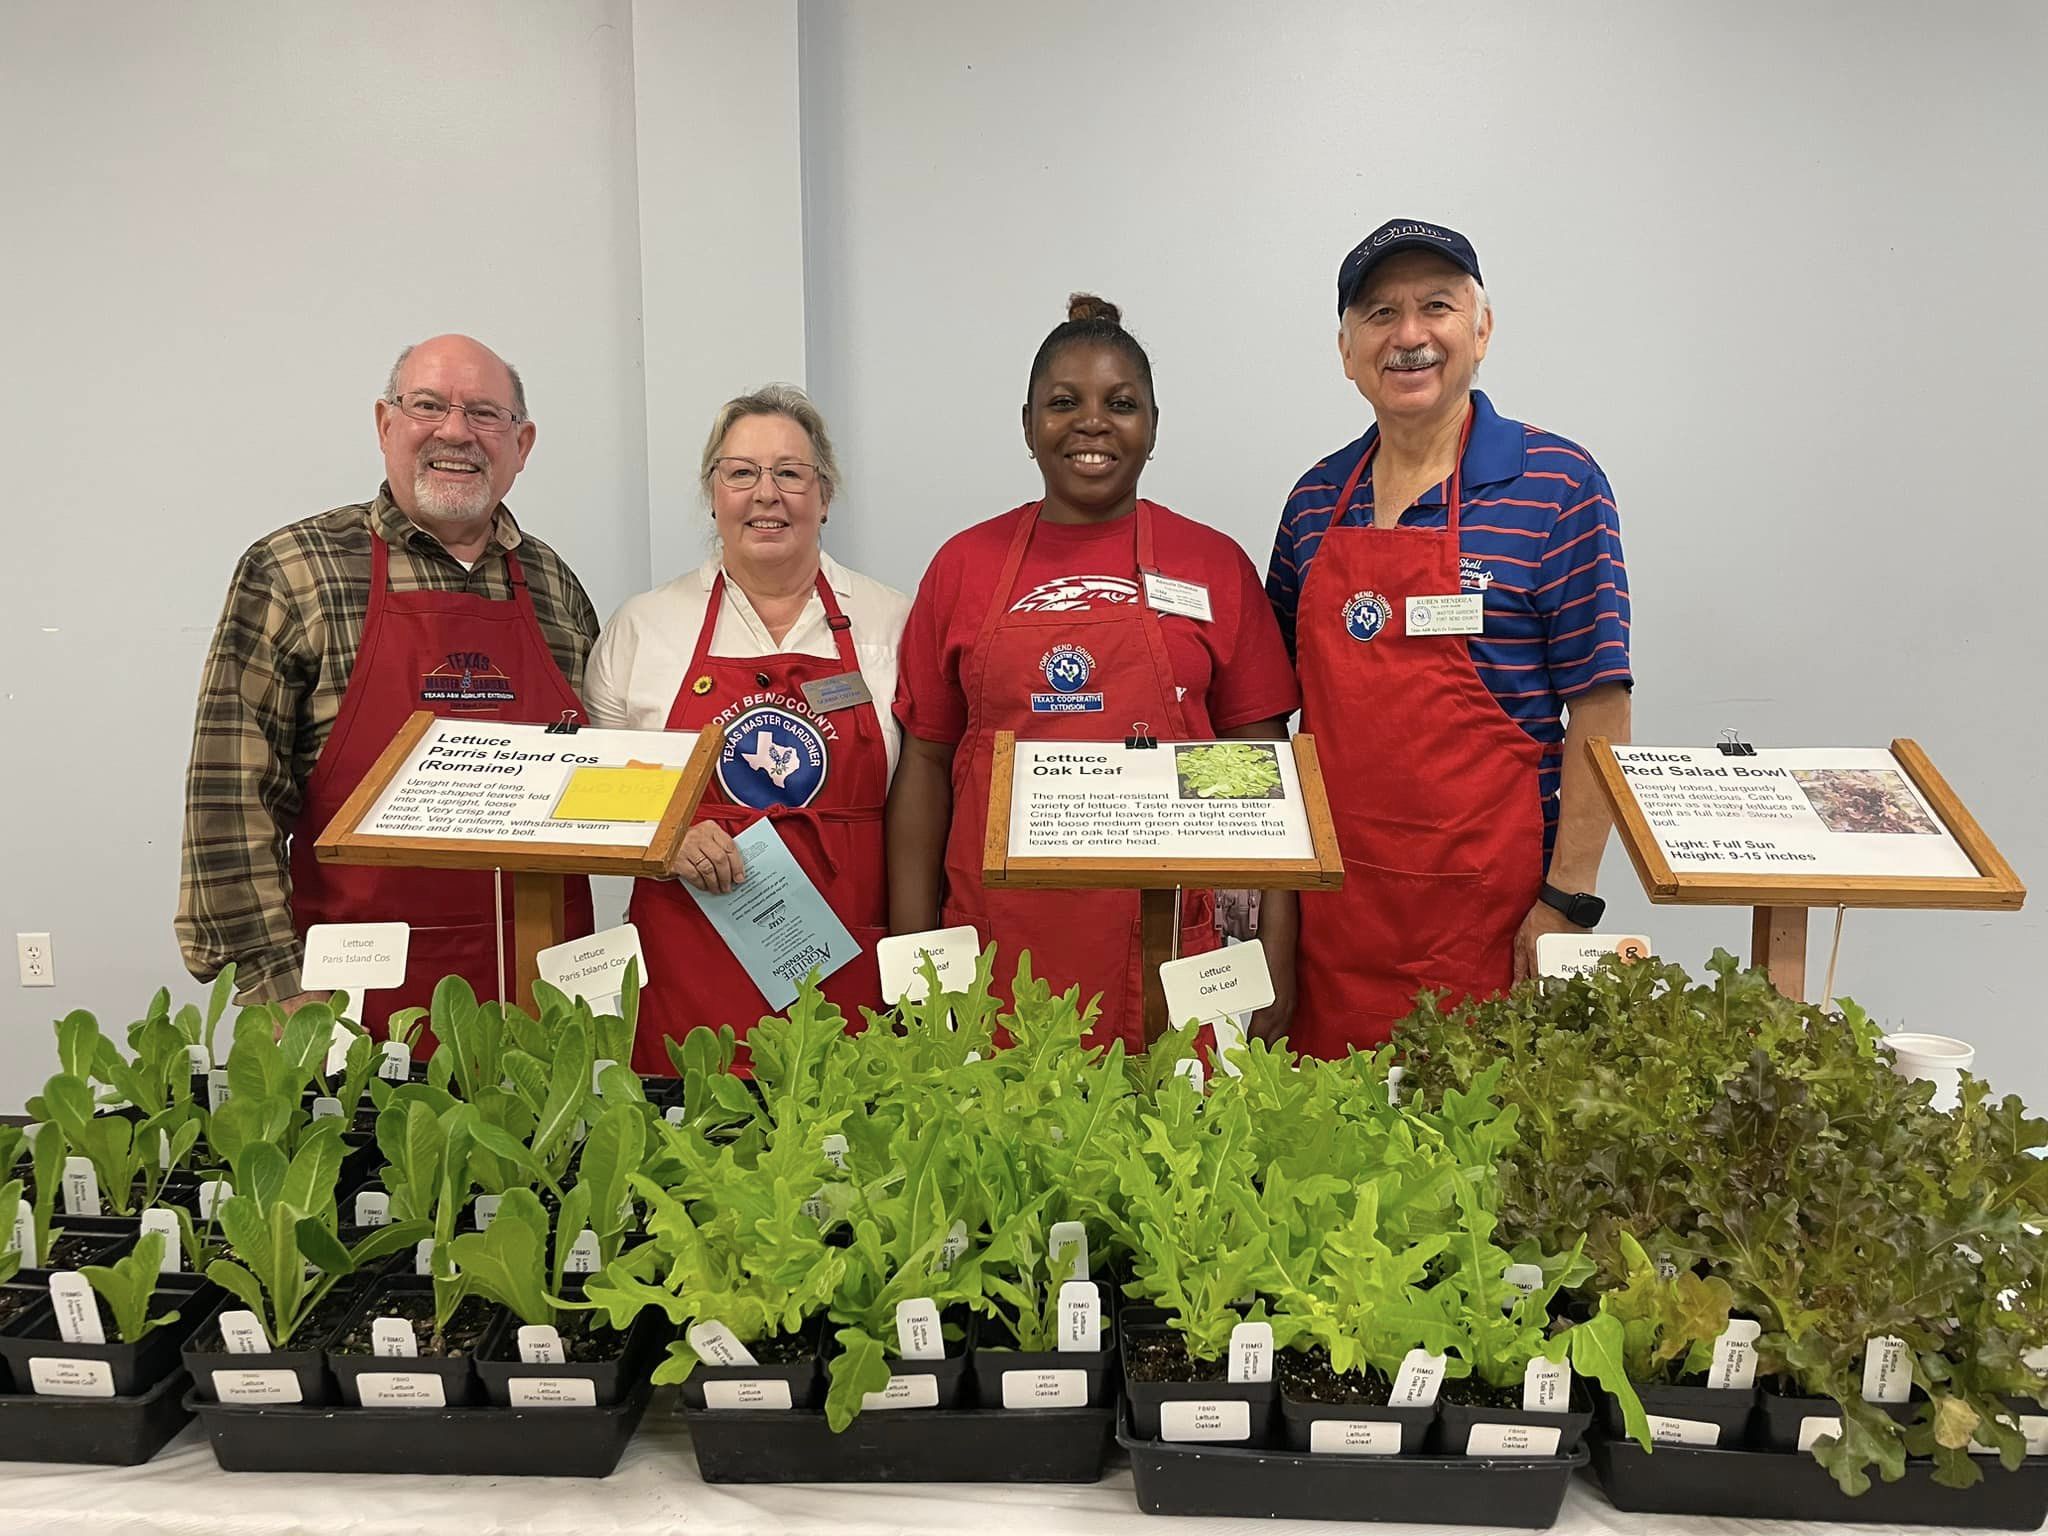 Cultivate Your Green Thumb: Become a Master Gardener with Texas A&M AgriLife Extension of Fort Bend County